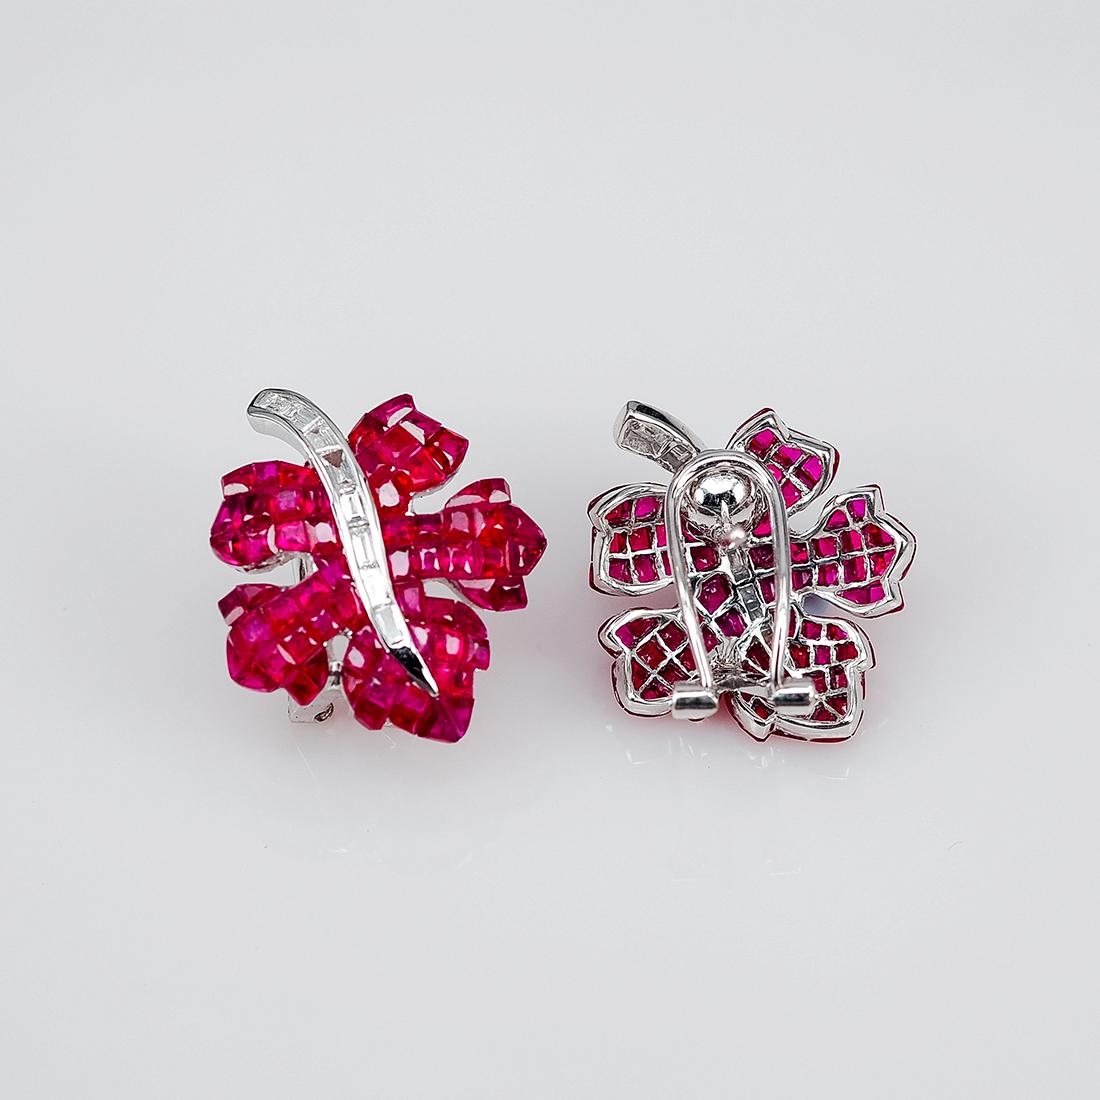 Ruby ear clip earrings design as classic luxury elegant style.You can use for everyday and also for the evening party.We use the top quality Ruby which make in invisible setting.We set the stone in perfection as we are professional in this kind of